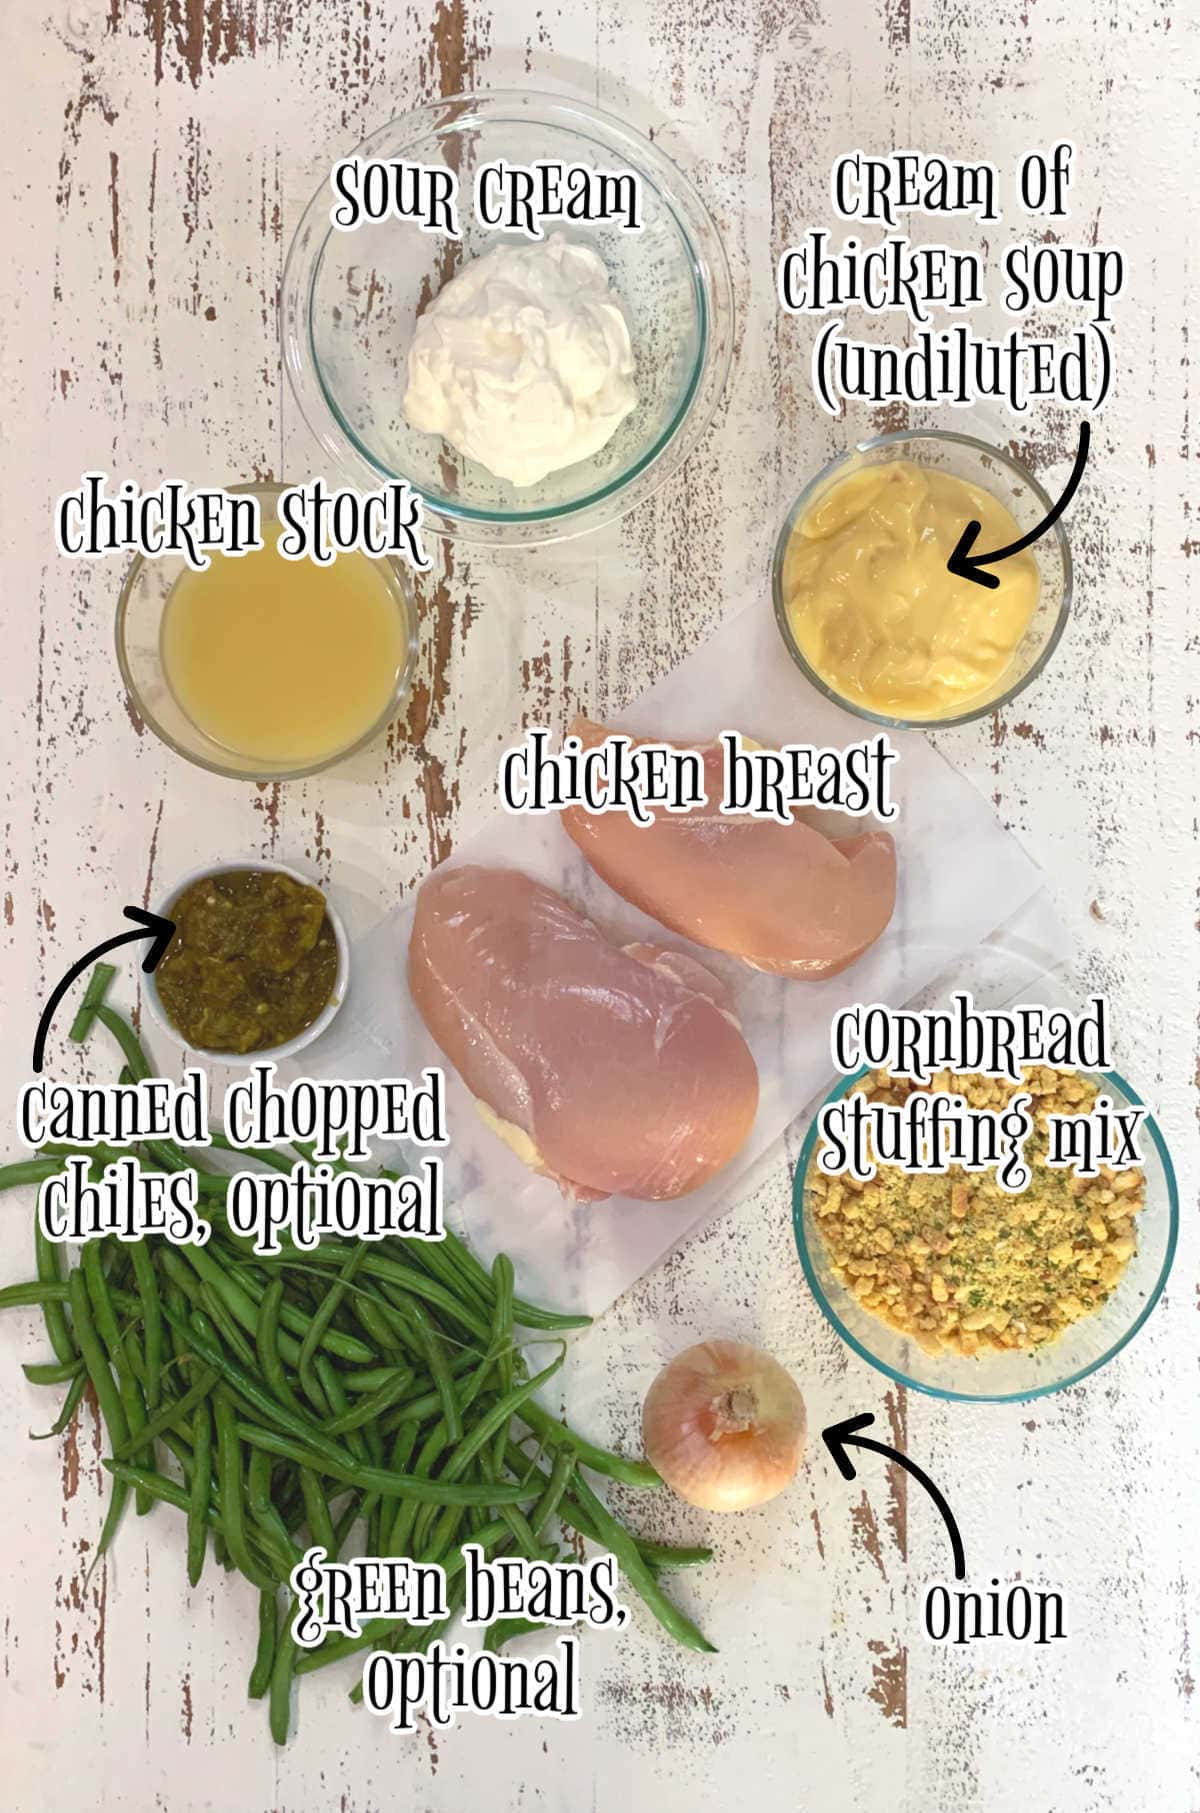 Labeled ingredients for this chicken and stuffing casserole recipe.